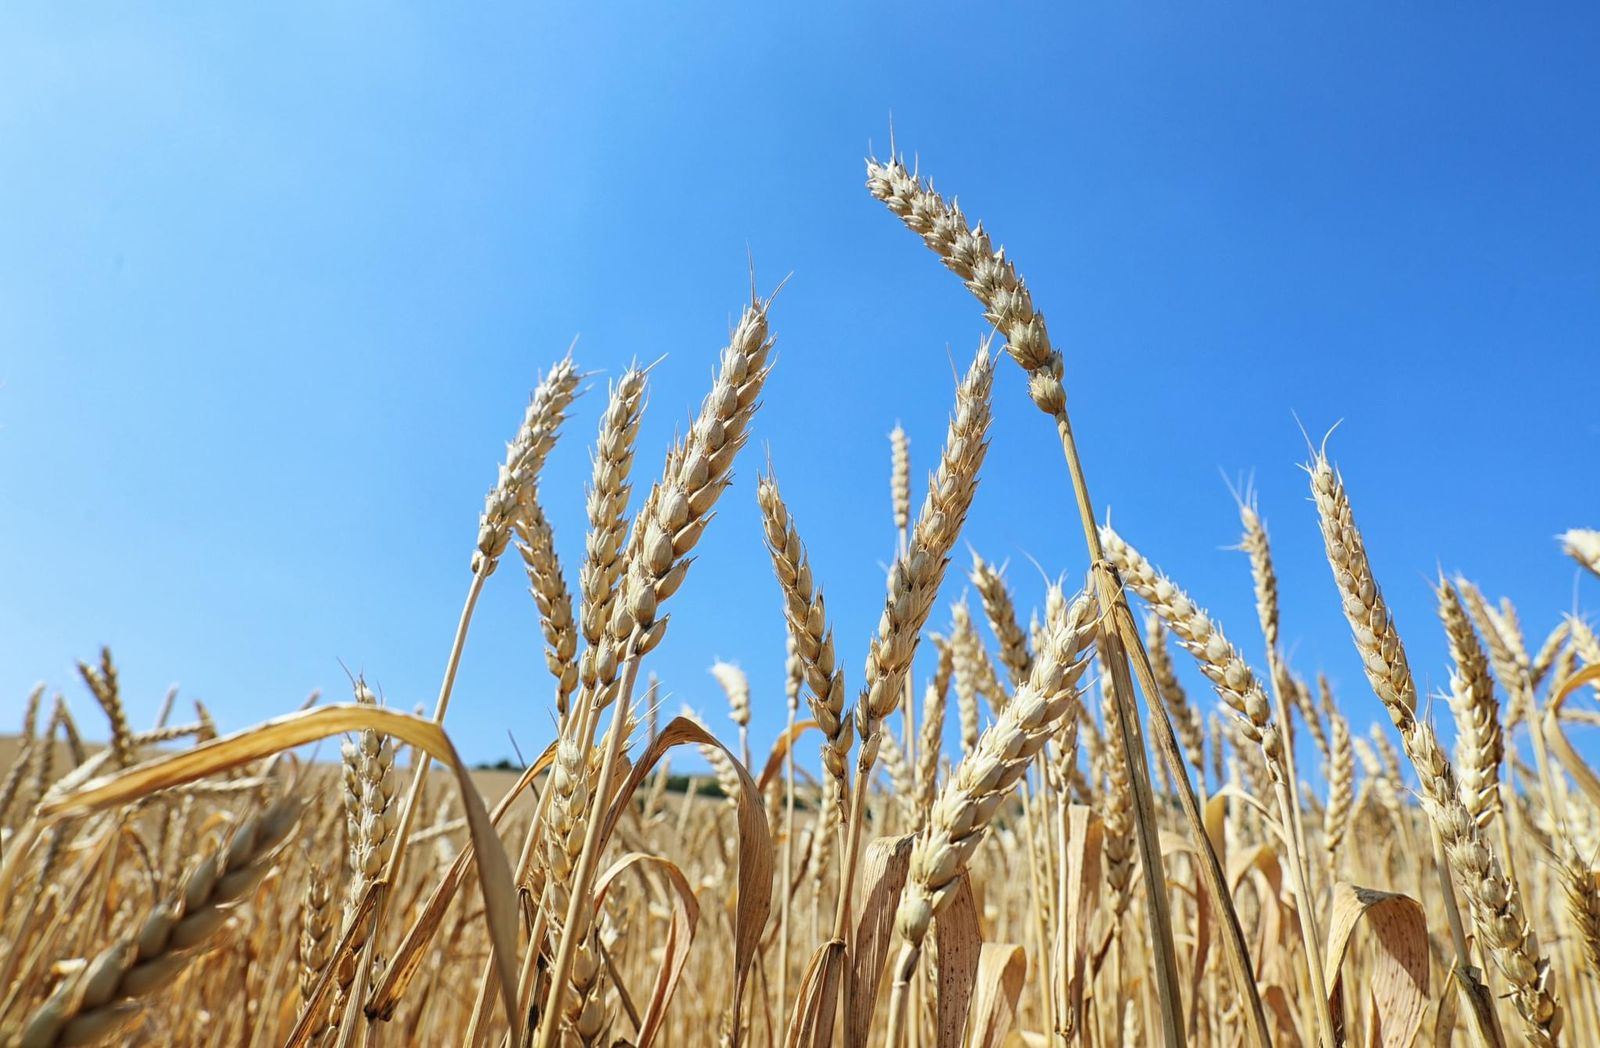 Black Sea grain deal keeps making a difference: UN official